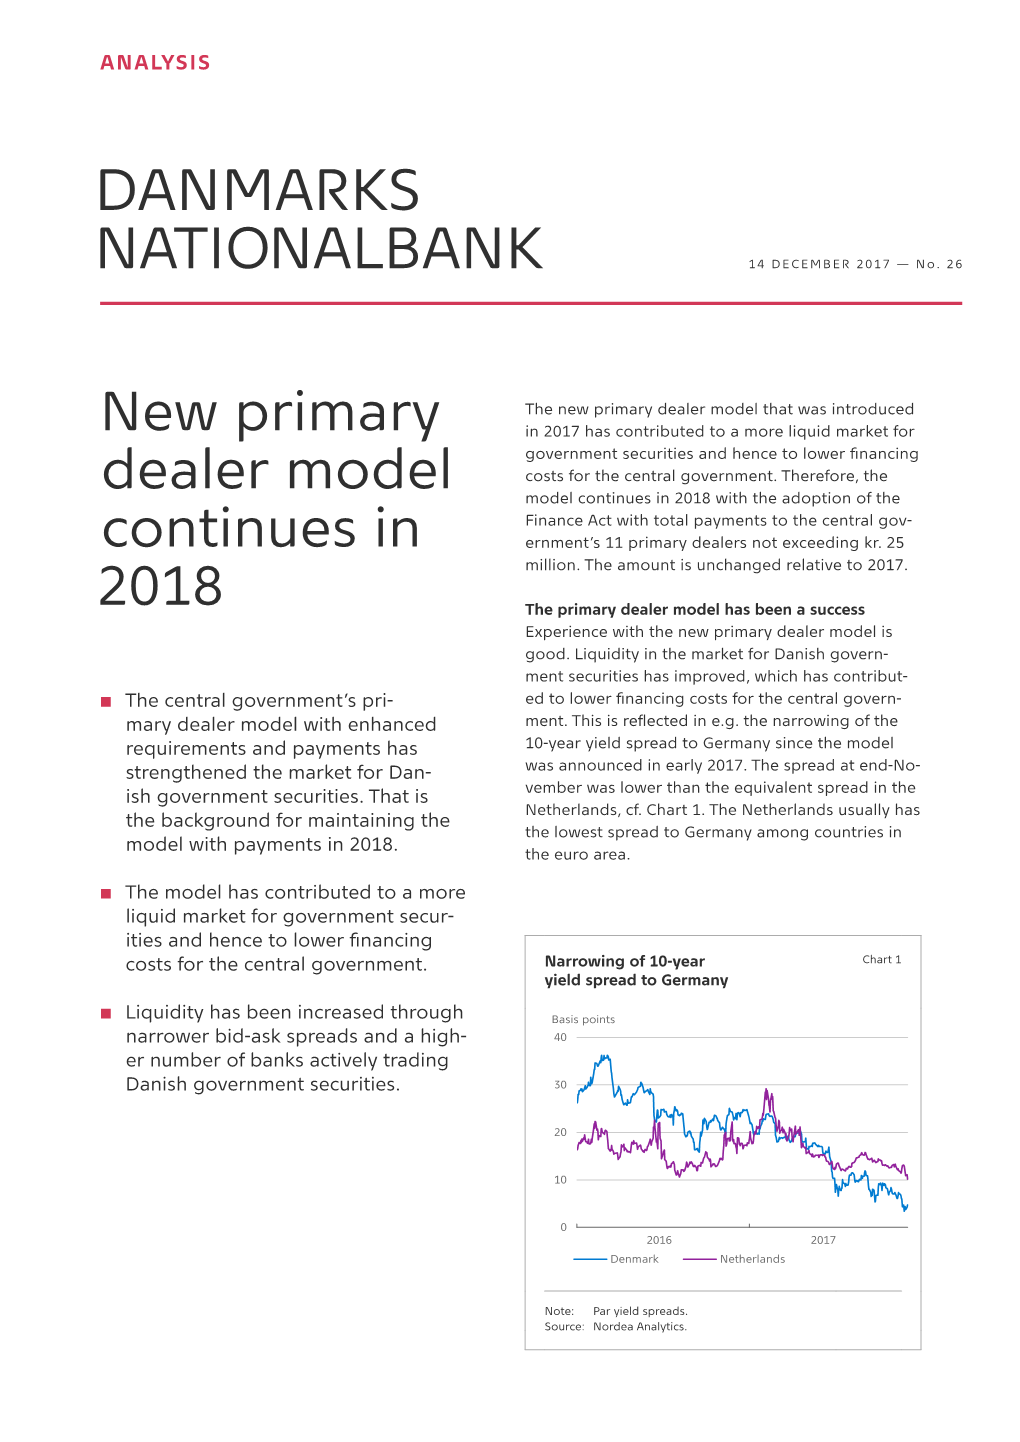 Danmarks Nationalbank 2 New Primary Dealer Model Continues in 2018